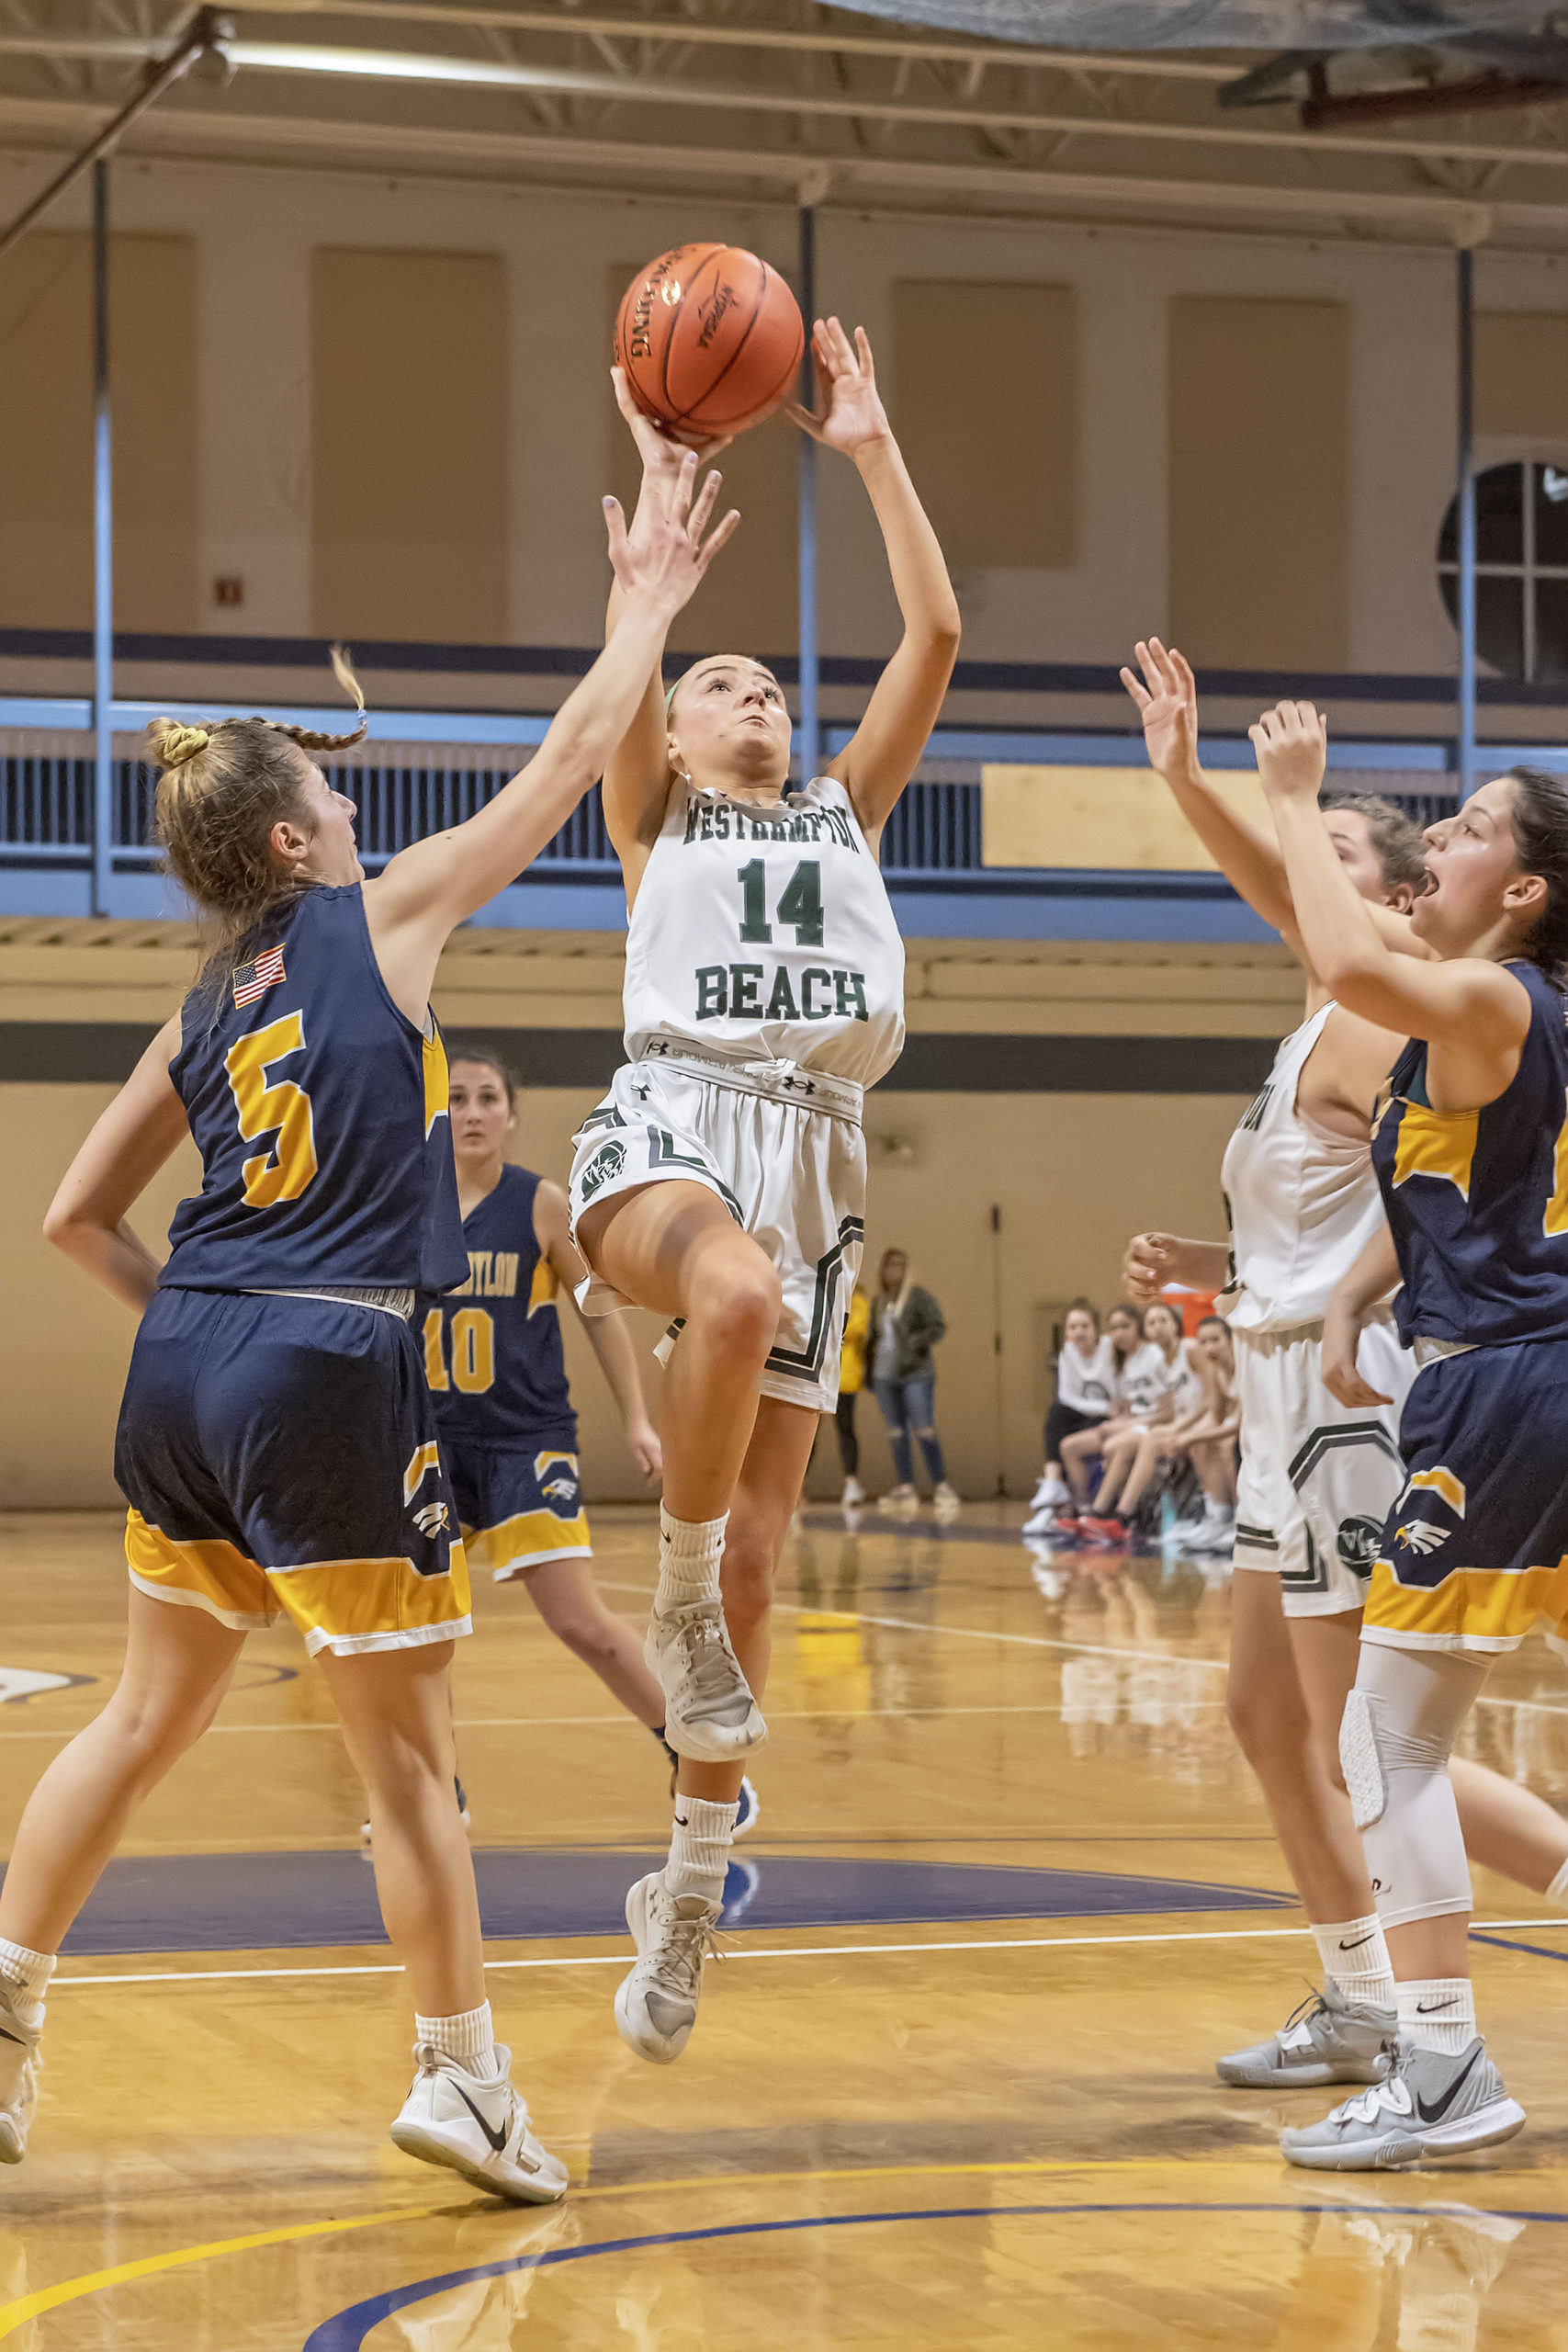 Westhampton Beach senior Isabelle Smith scored a game-high 22 points on Tuesday night.